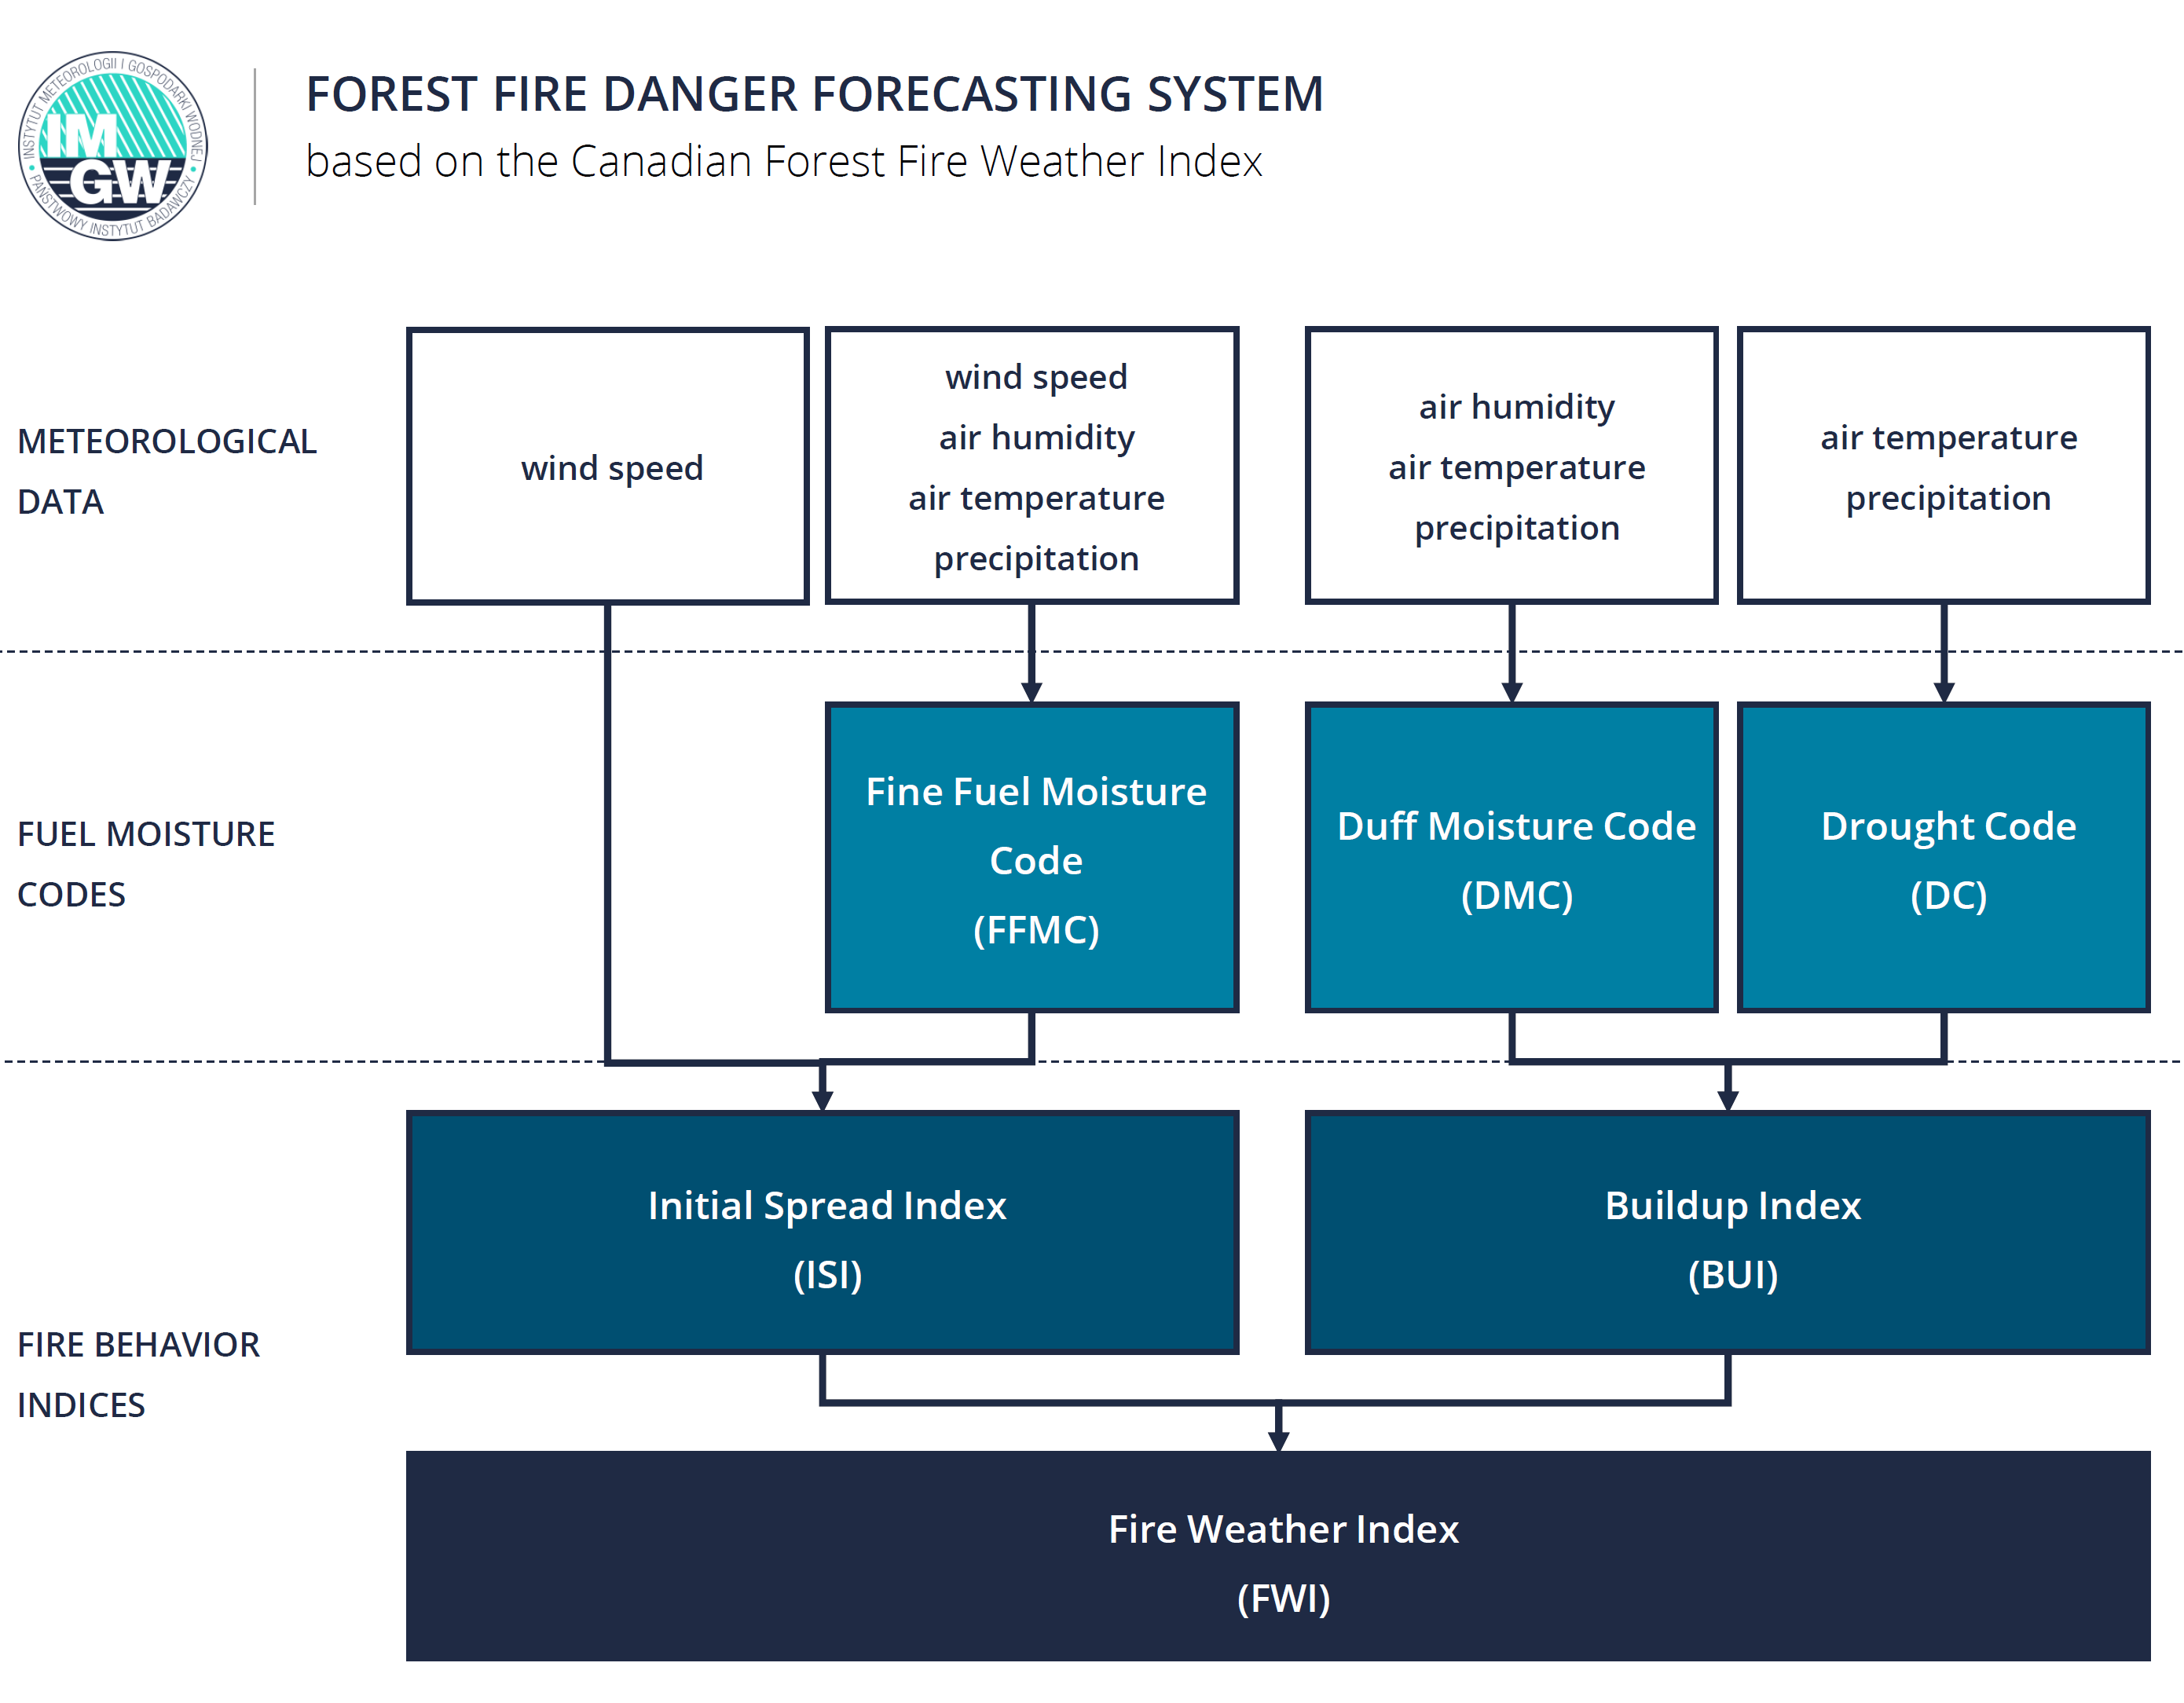 Diagram of the forest fire danger forecasting system IMGW-PIB (based on the Canadian Forest Fire Weather Index).